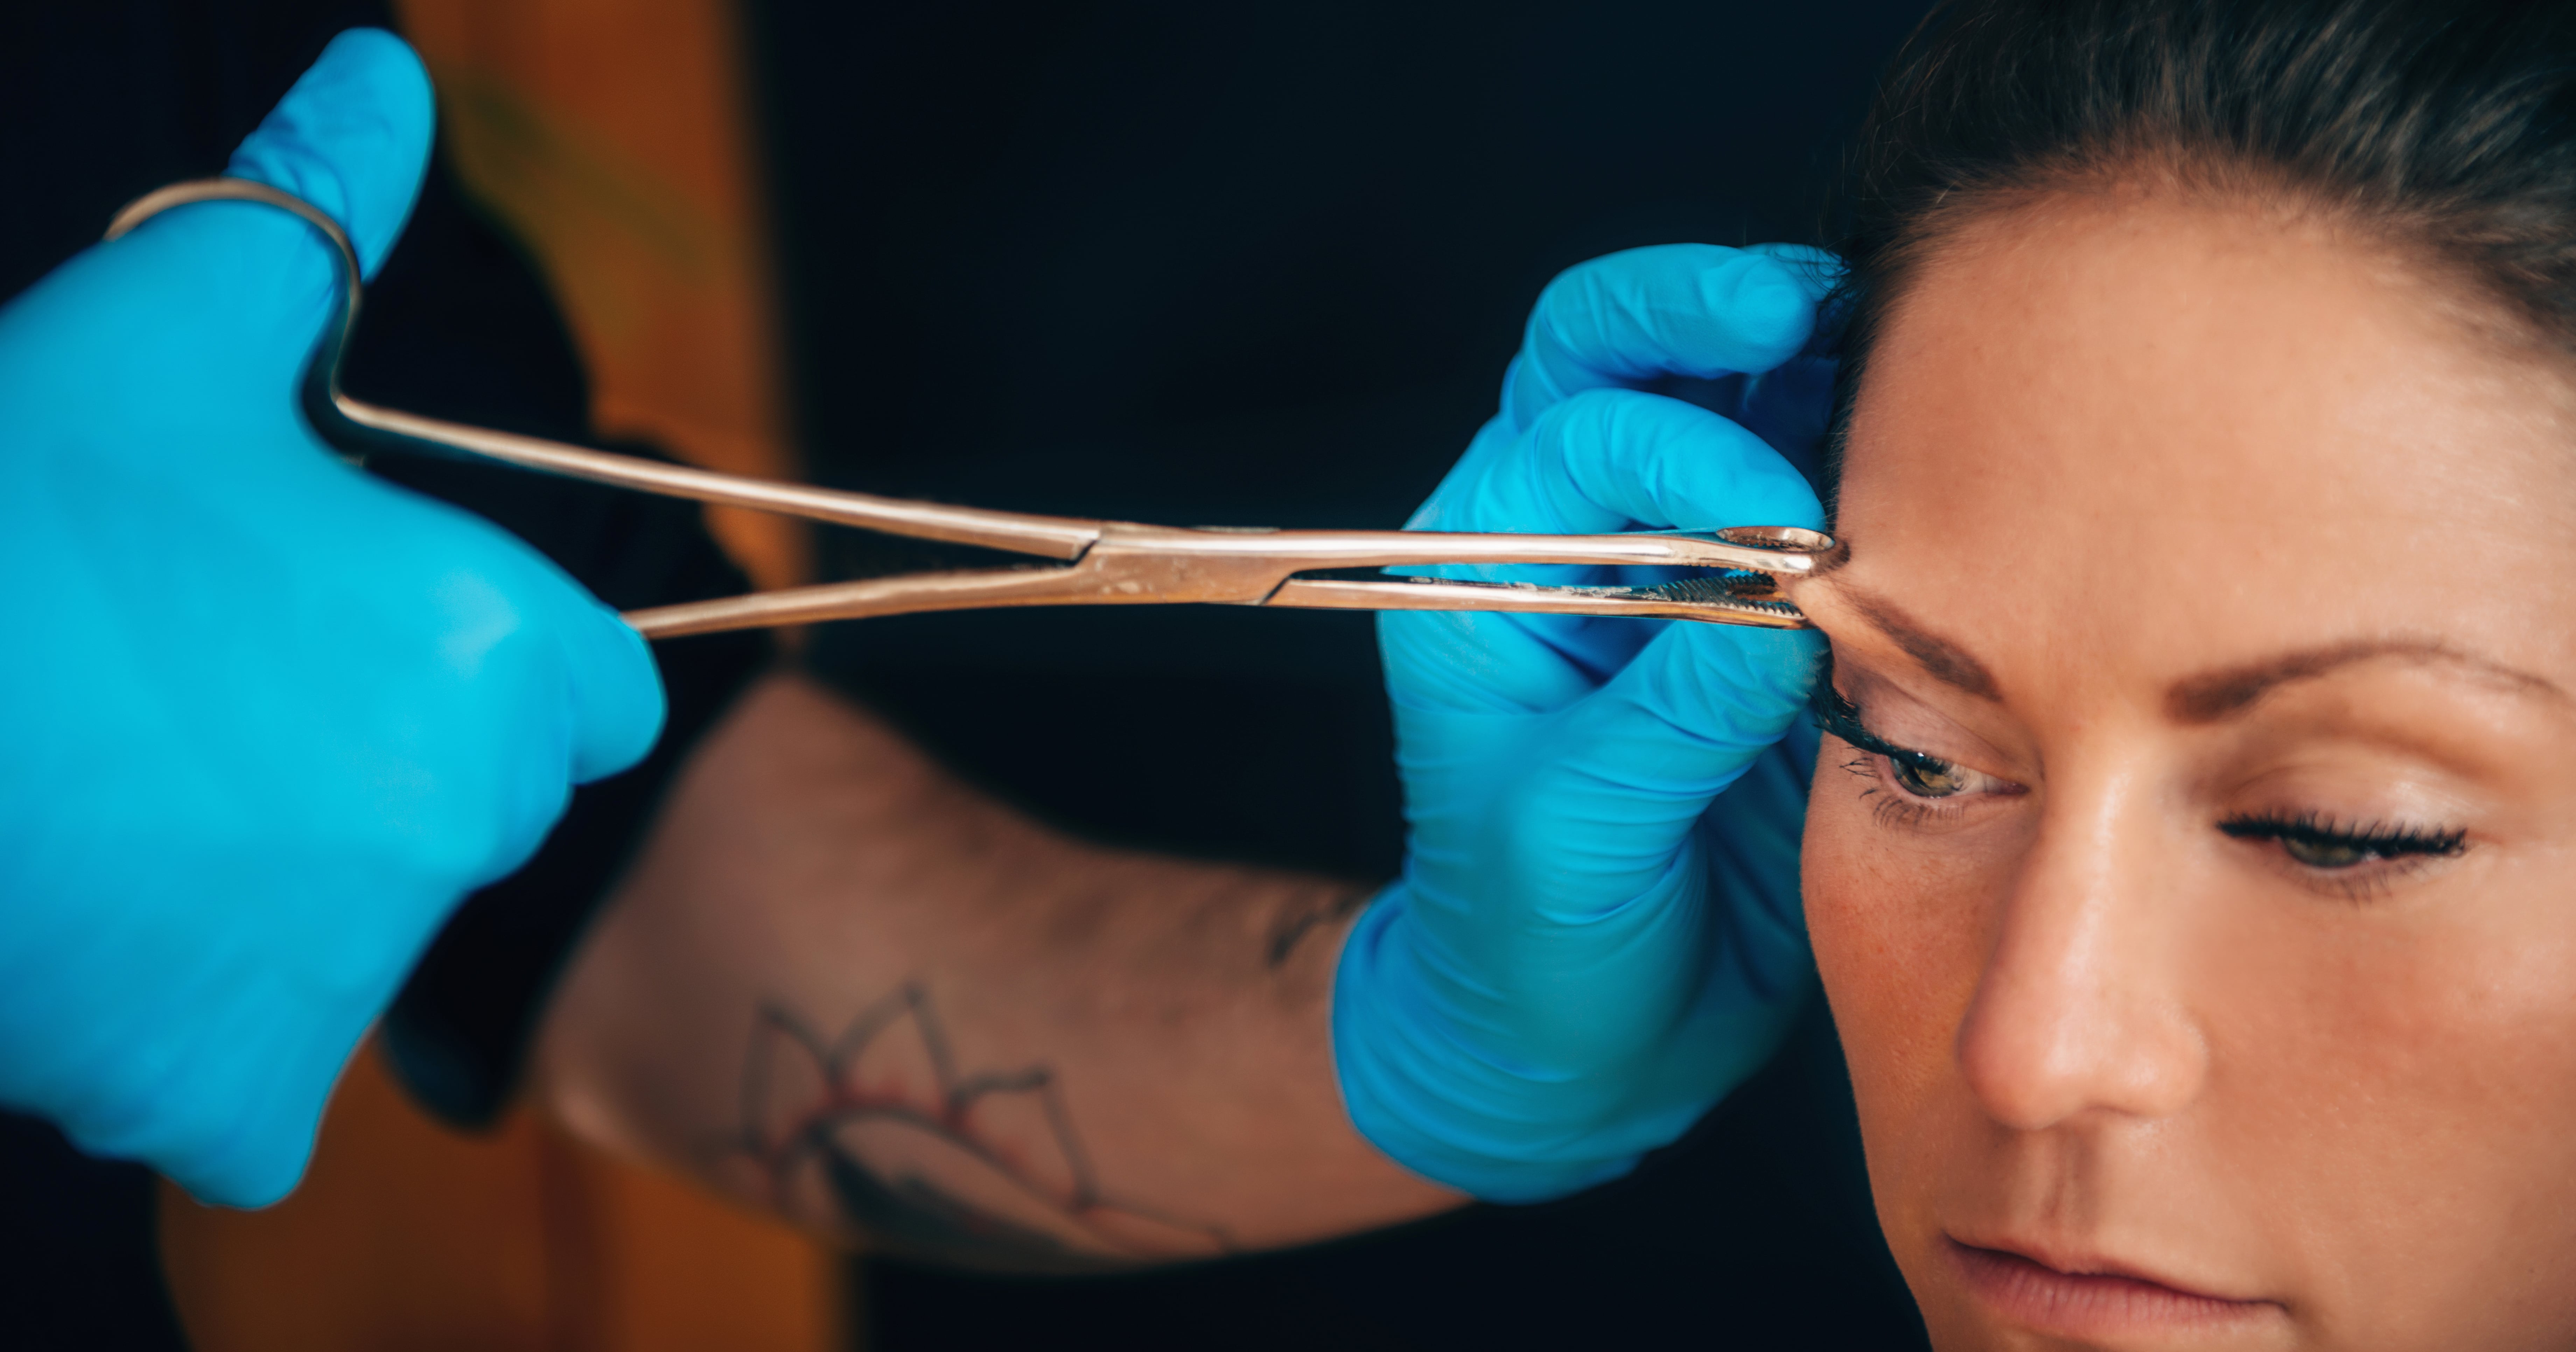 What to Know Before Getting an Eyebrow Piercing | POPSUGAR Beauty